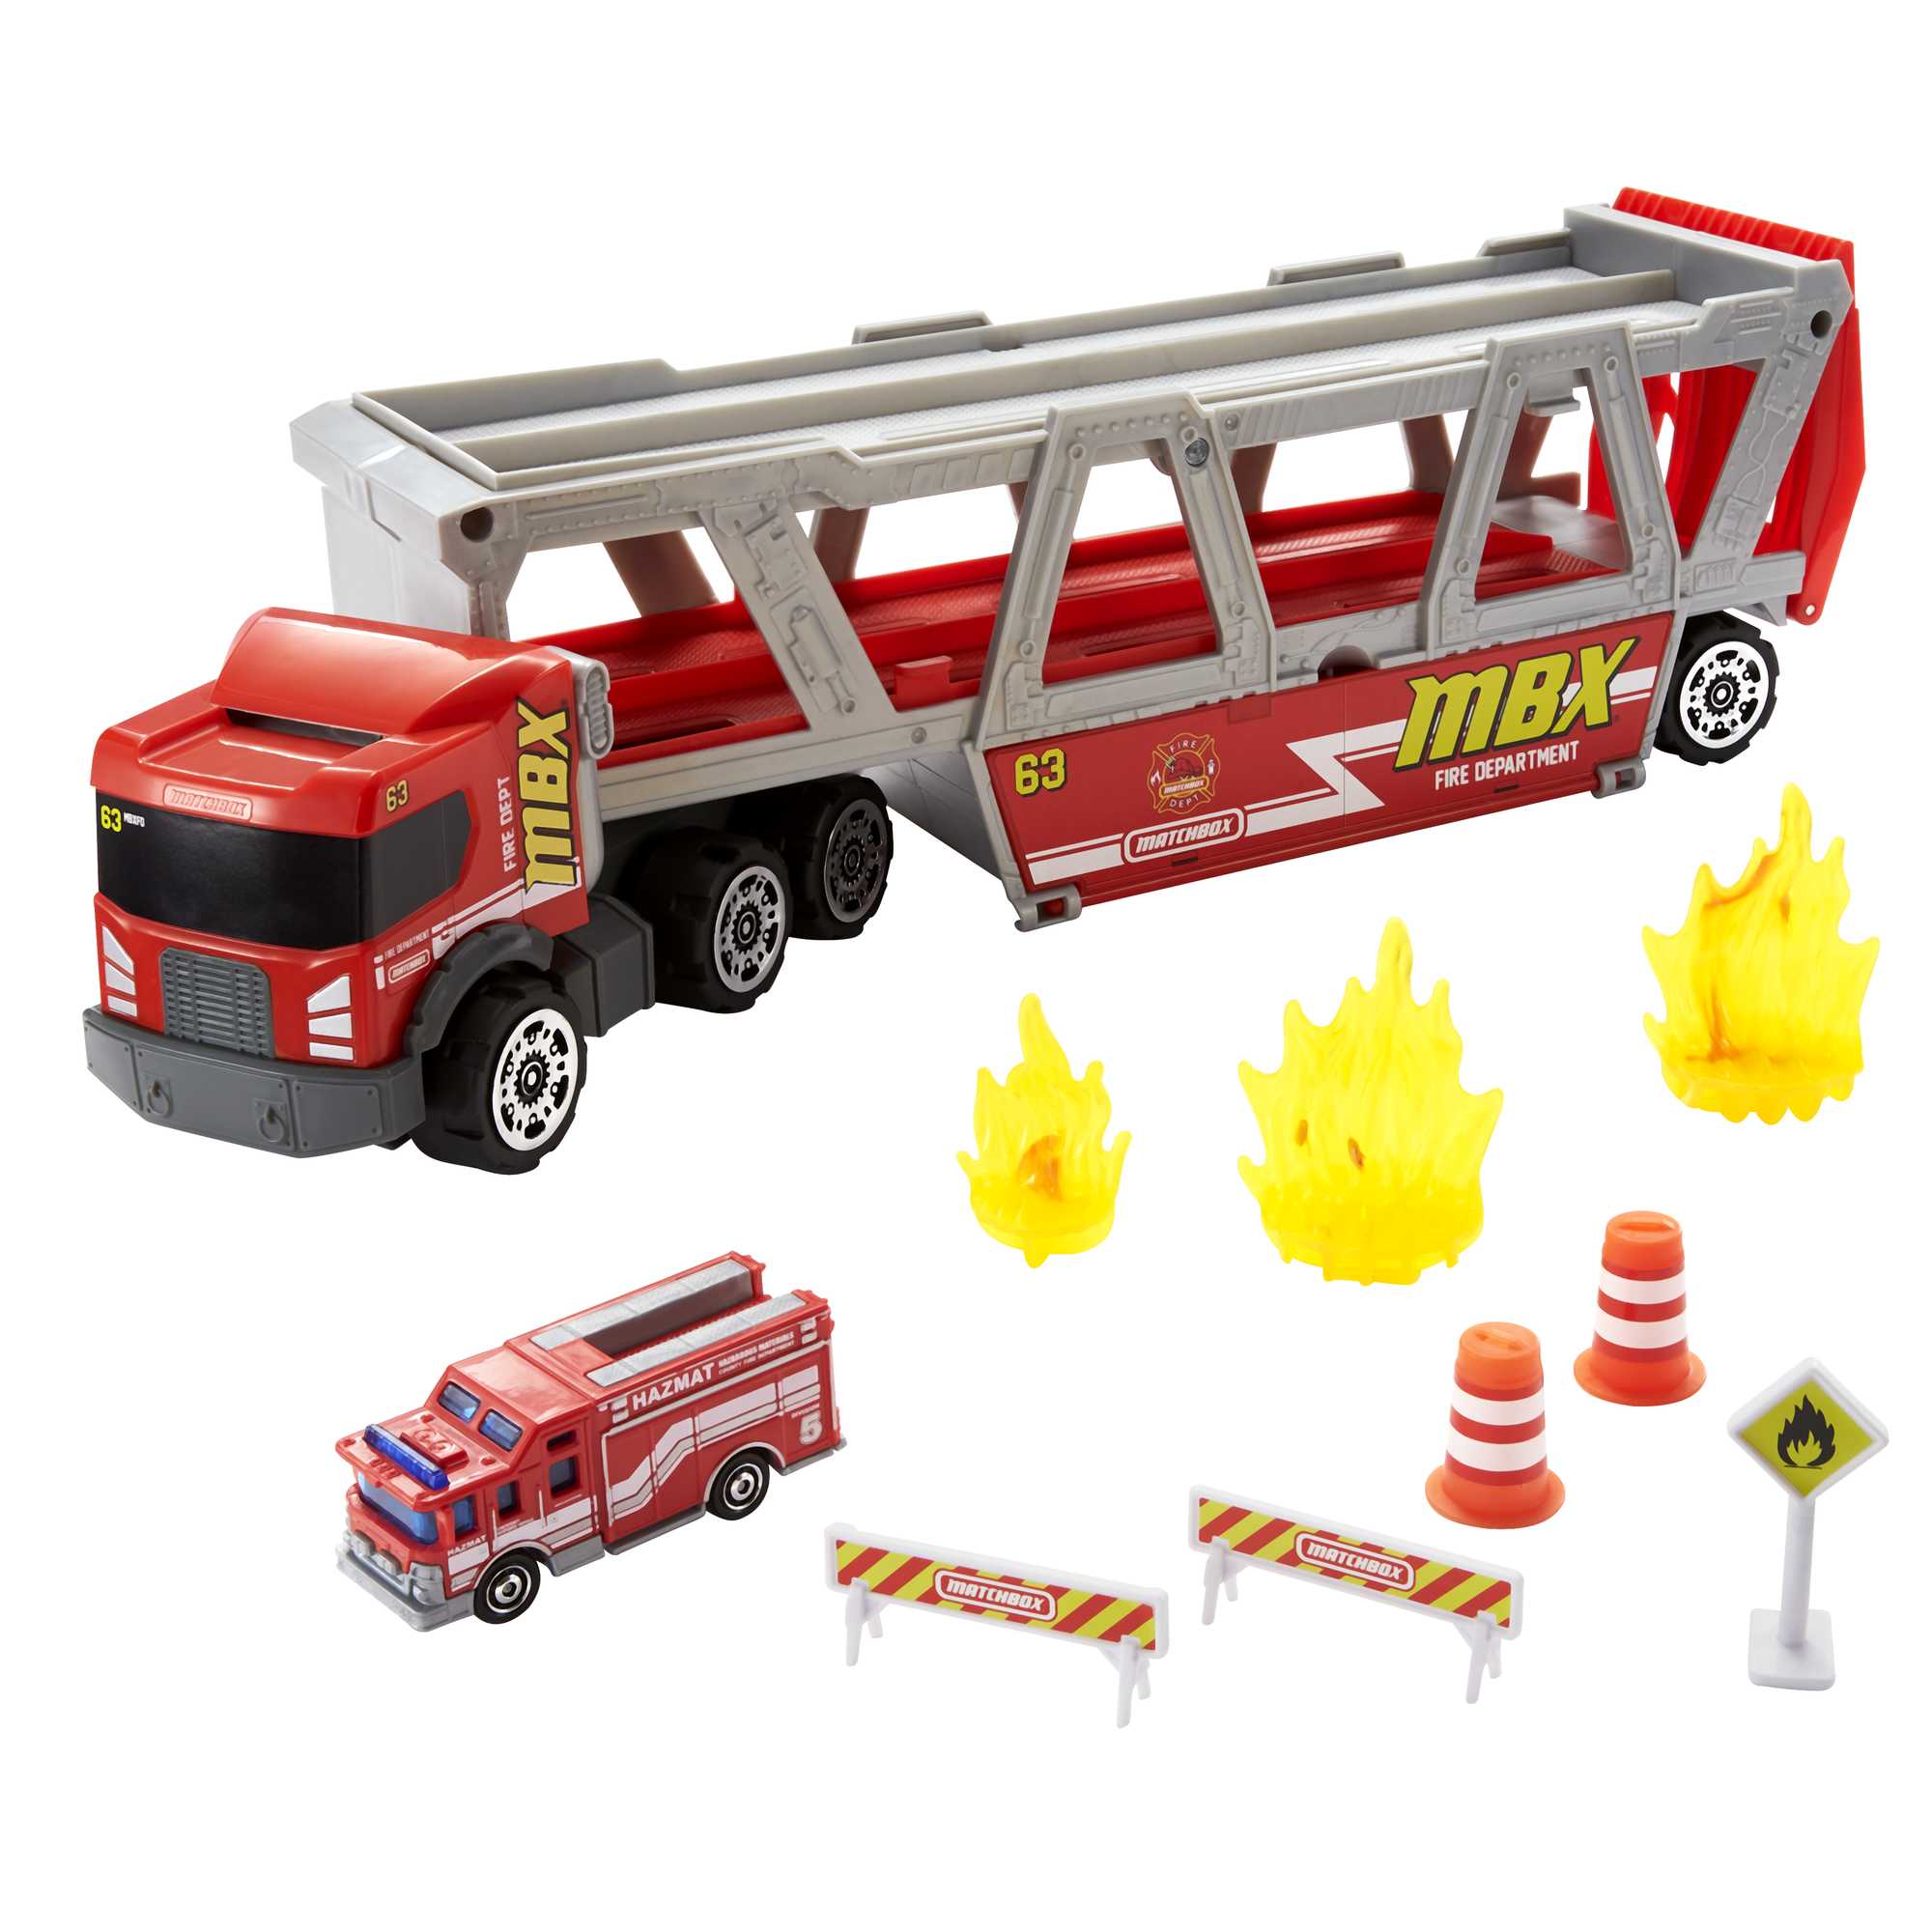 Matchbox Fire Rescue Hauler Playset with Detachable Cab, 1:64 Scale Toy Firetruck & 8 Accessories - image 1 of 10